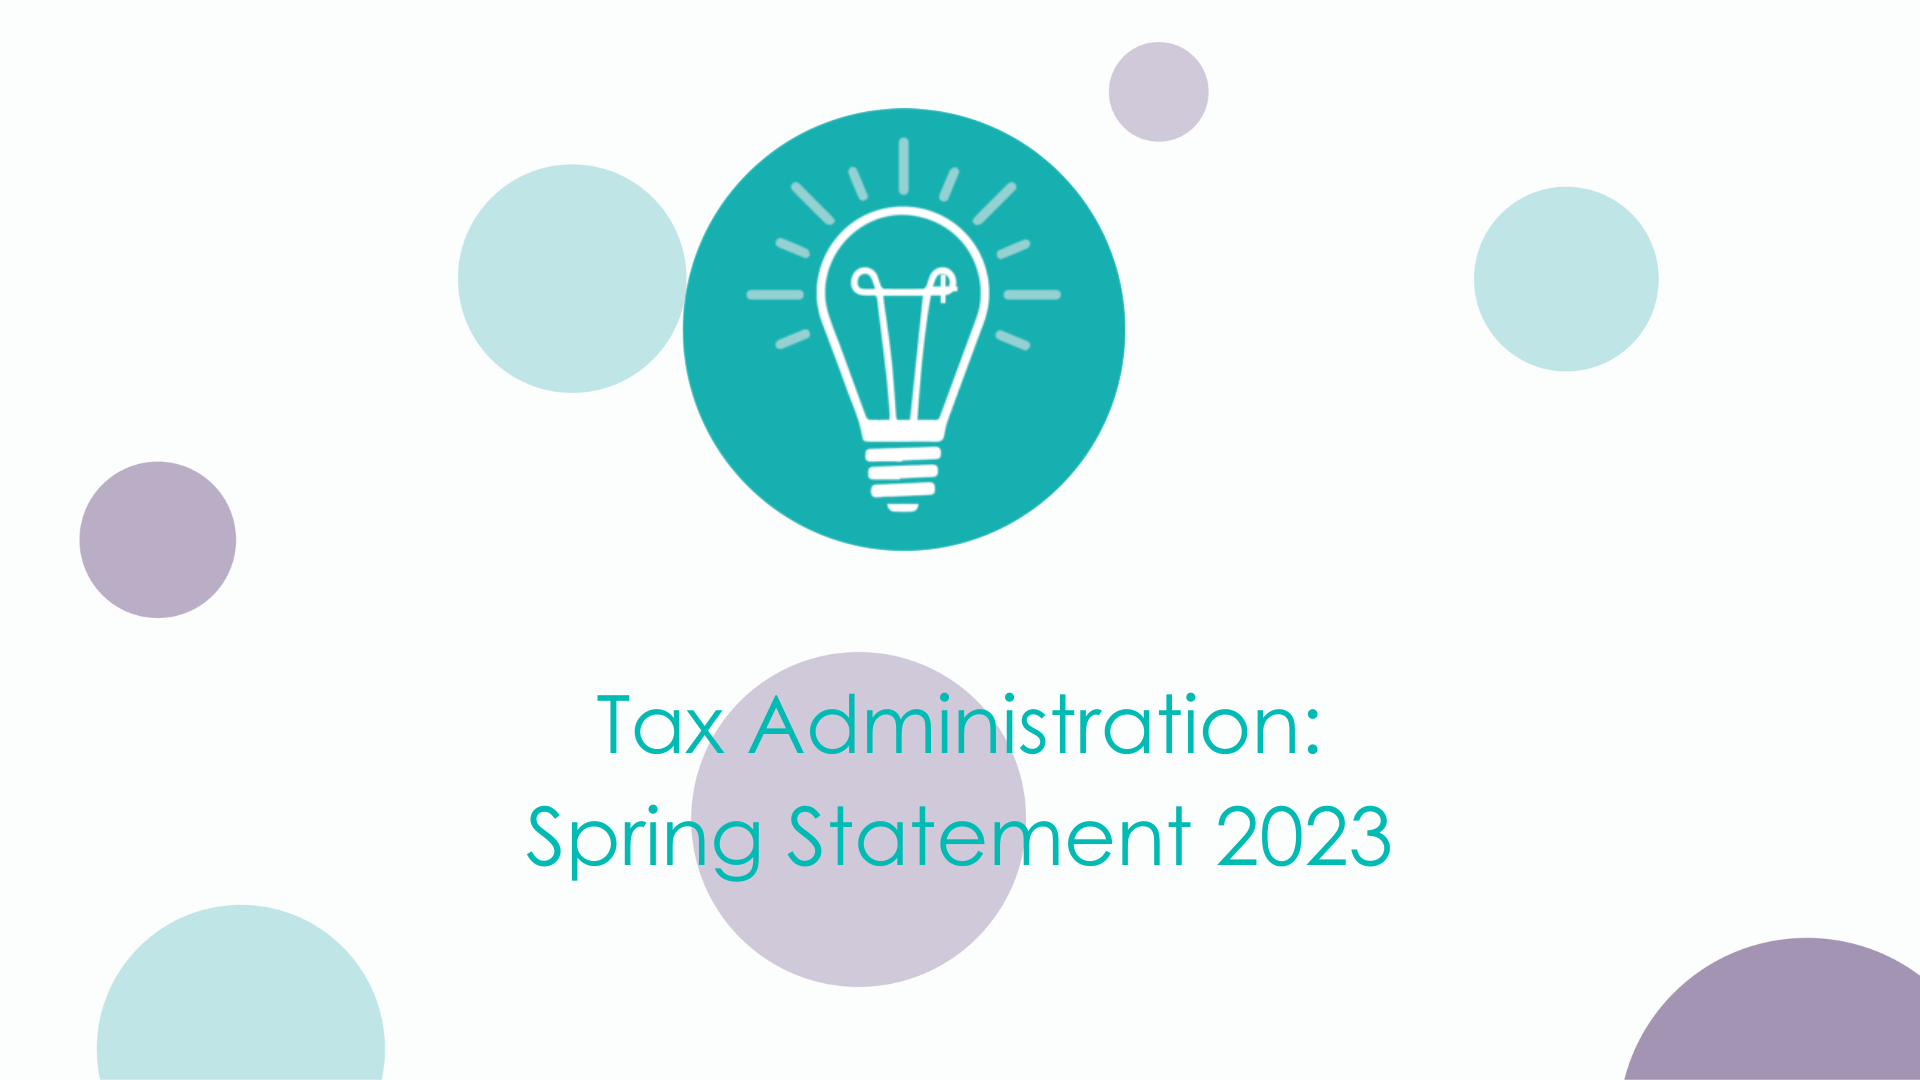 Spring Statement 2023: Tax Administration